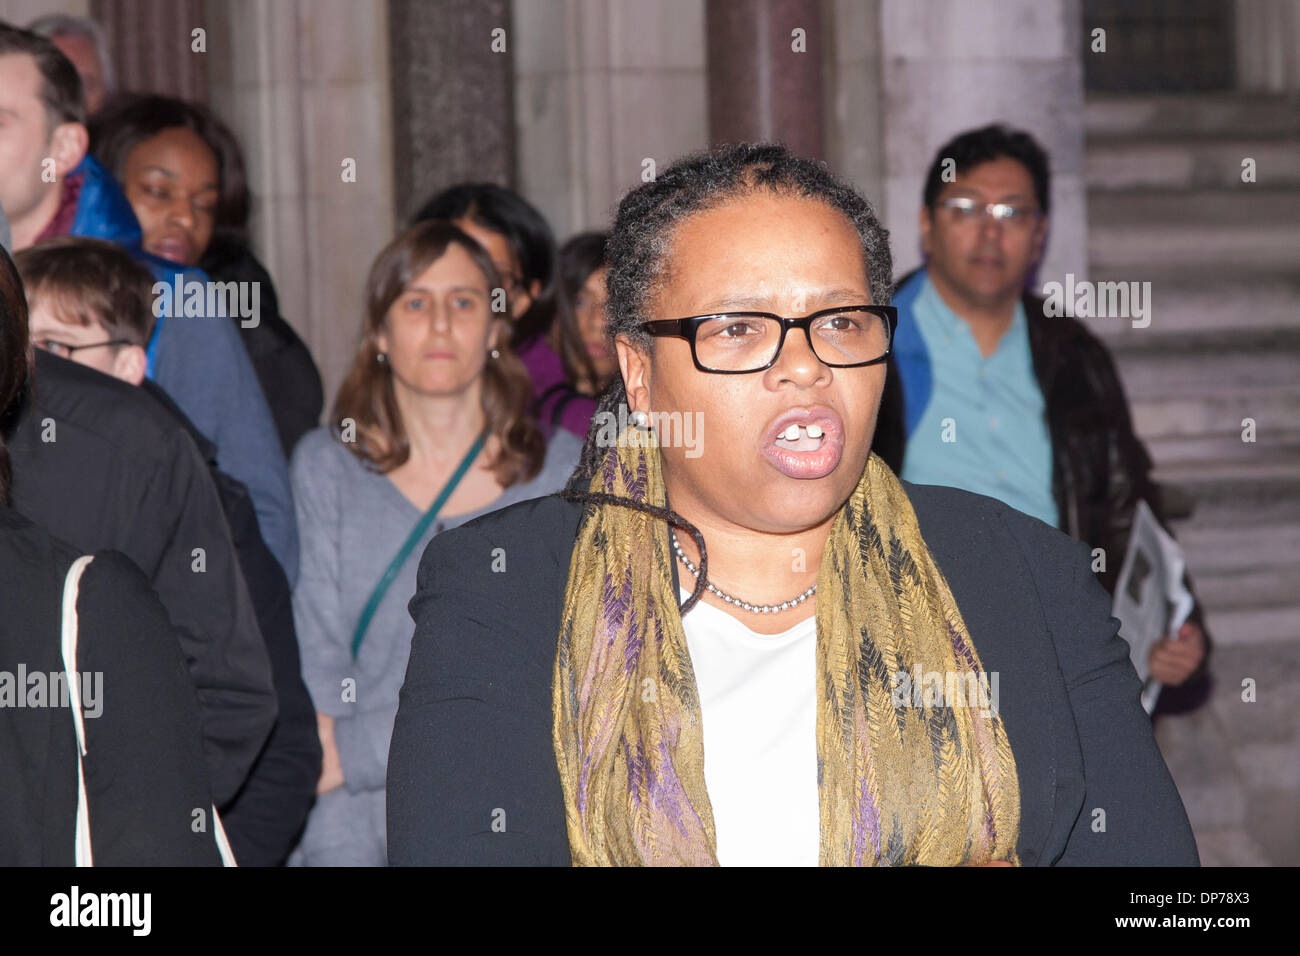 Royal Courts of Justice, London, January 8th 2014. A spokesperson for Mark Duggan's family addresses the press following the lawful killing verdict in the inquest into his death. Credit:  Paul Davey/Alamy Live News Stock Photo